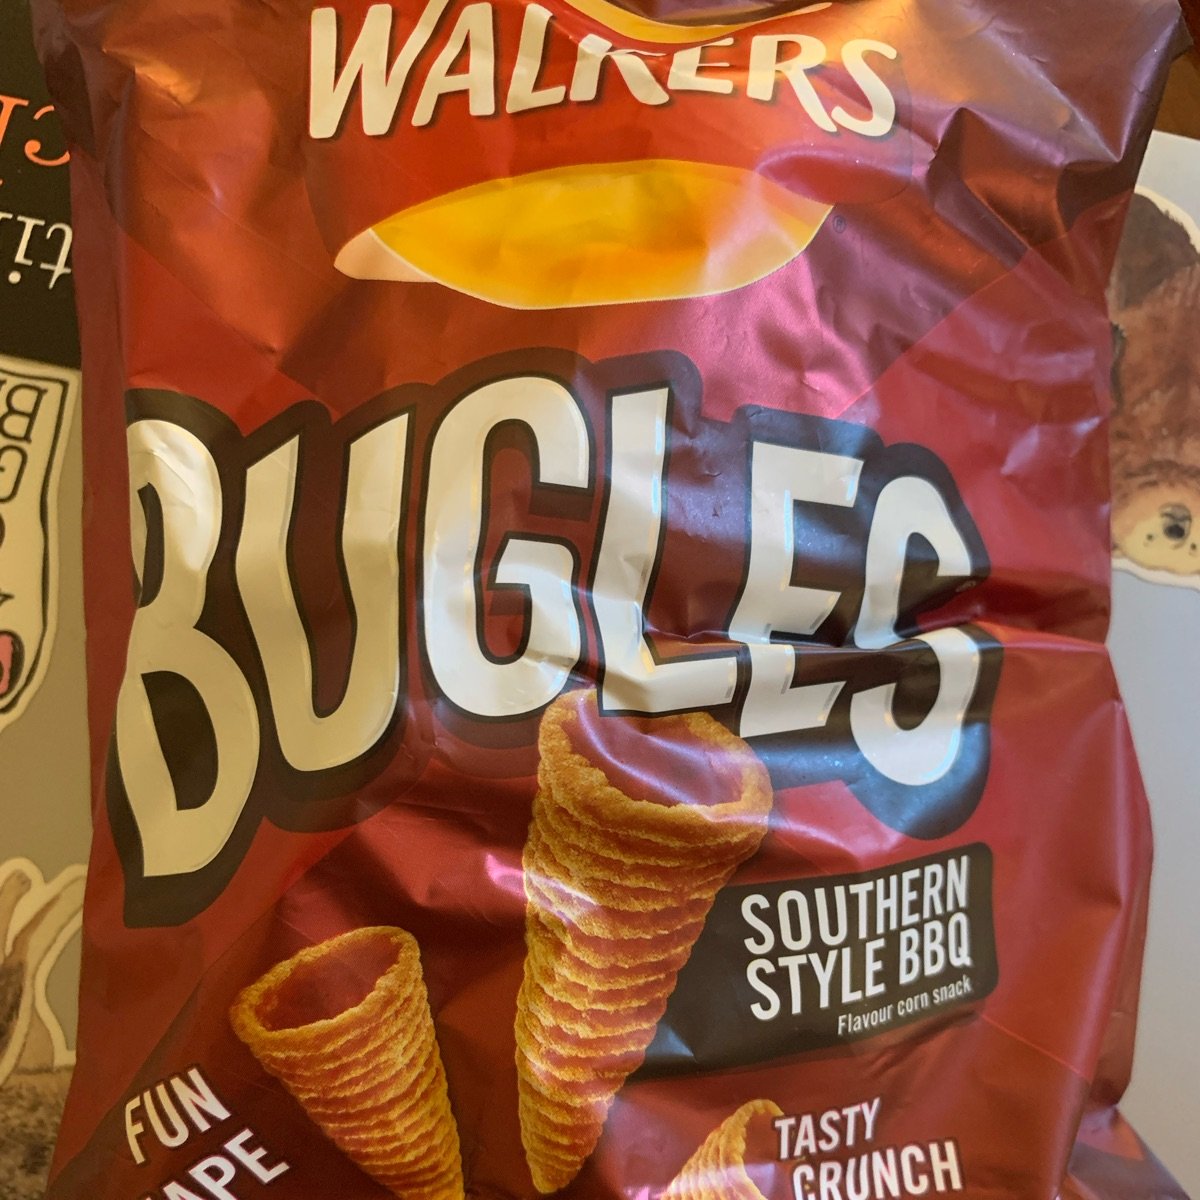 Walkers Bugles Southern Style BBQ Reviews | abillion